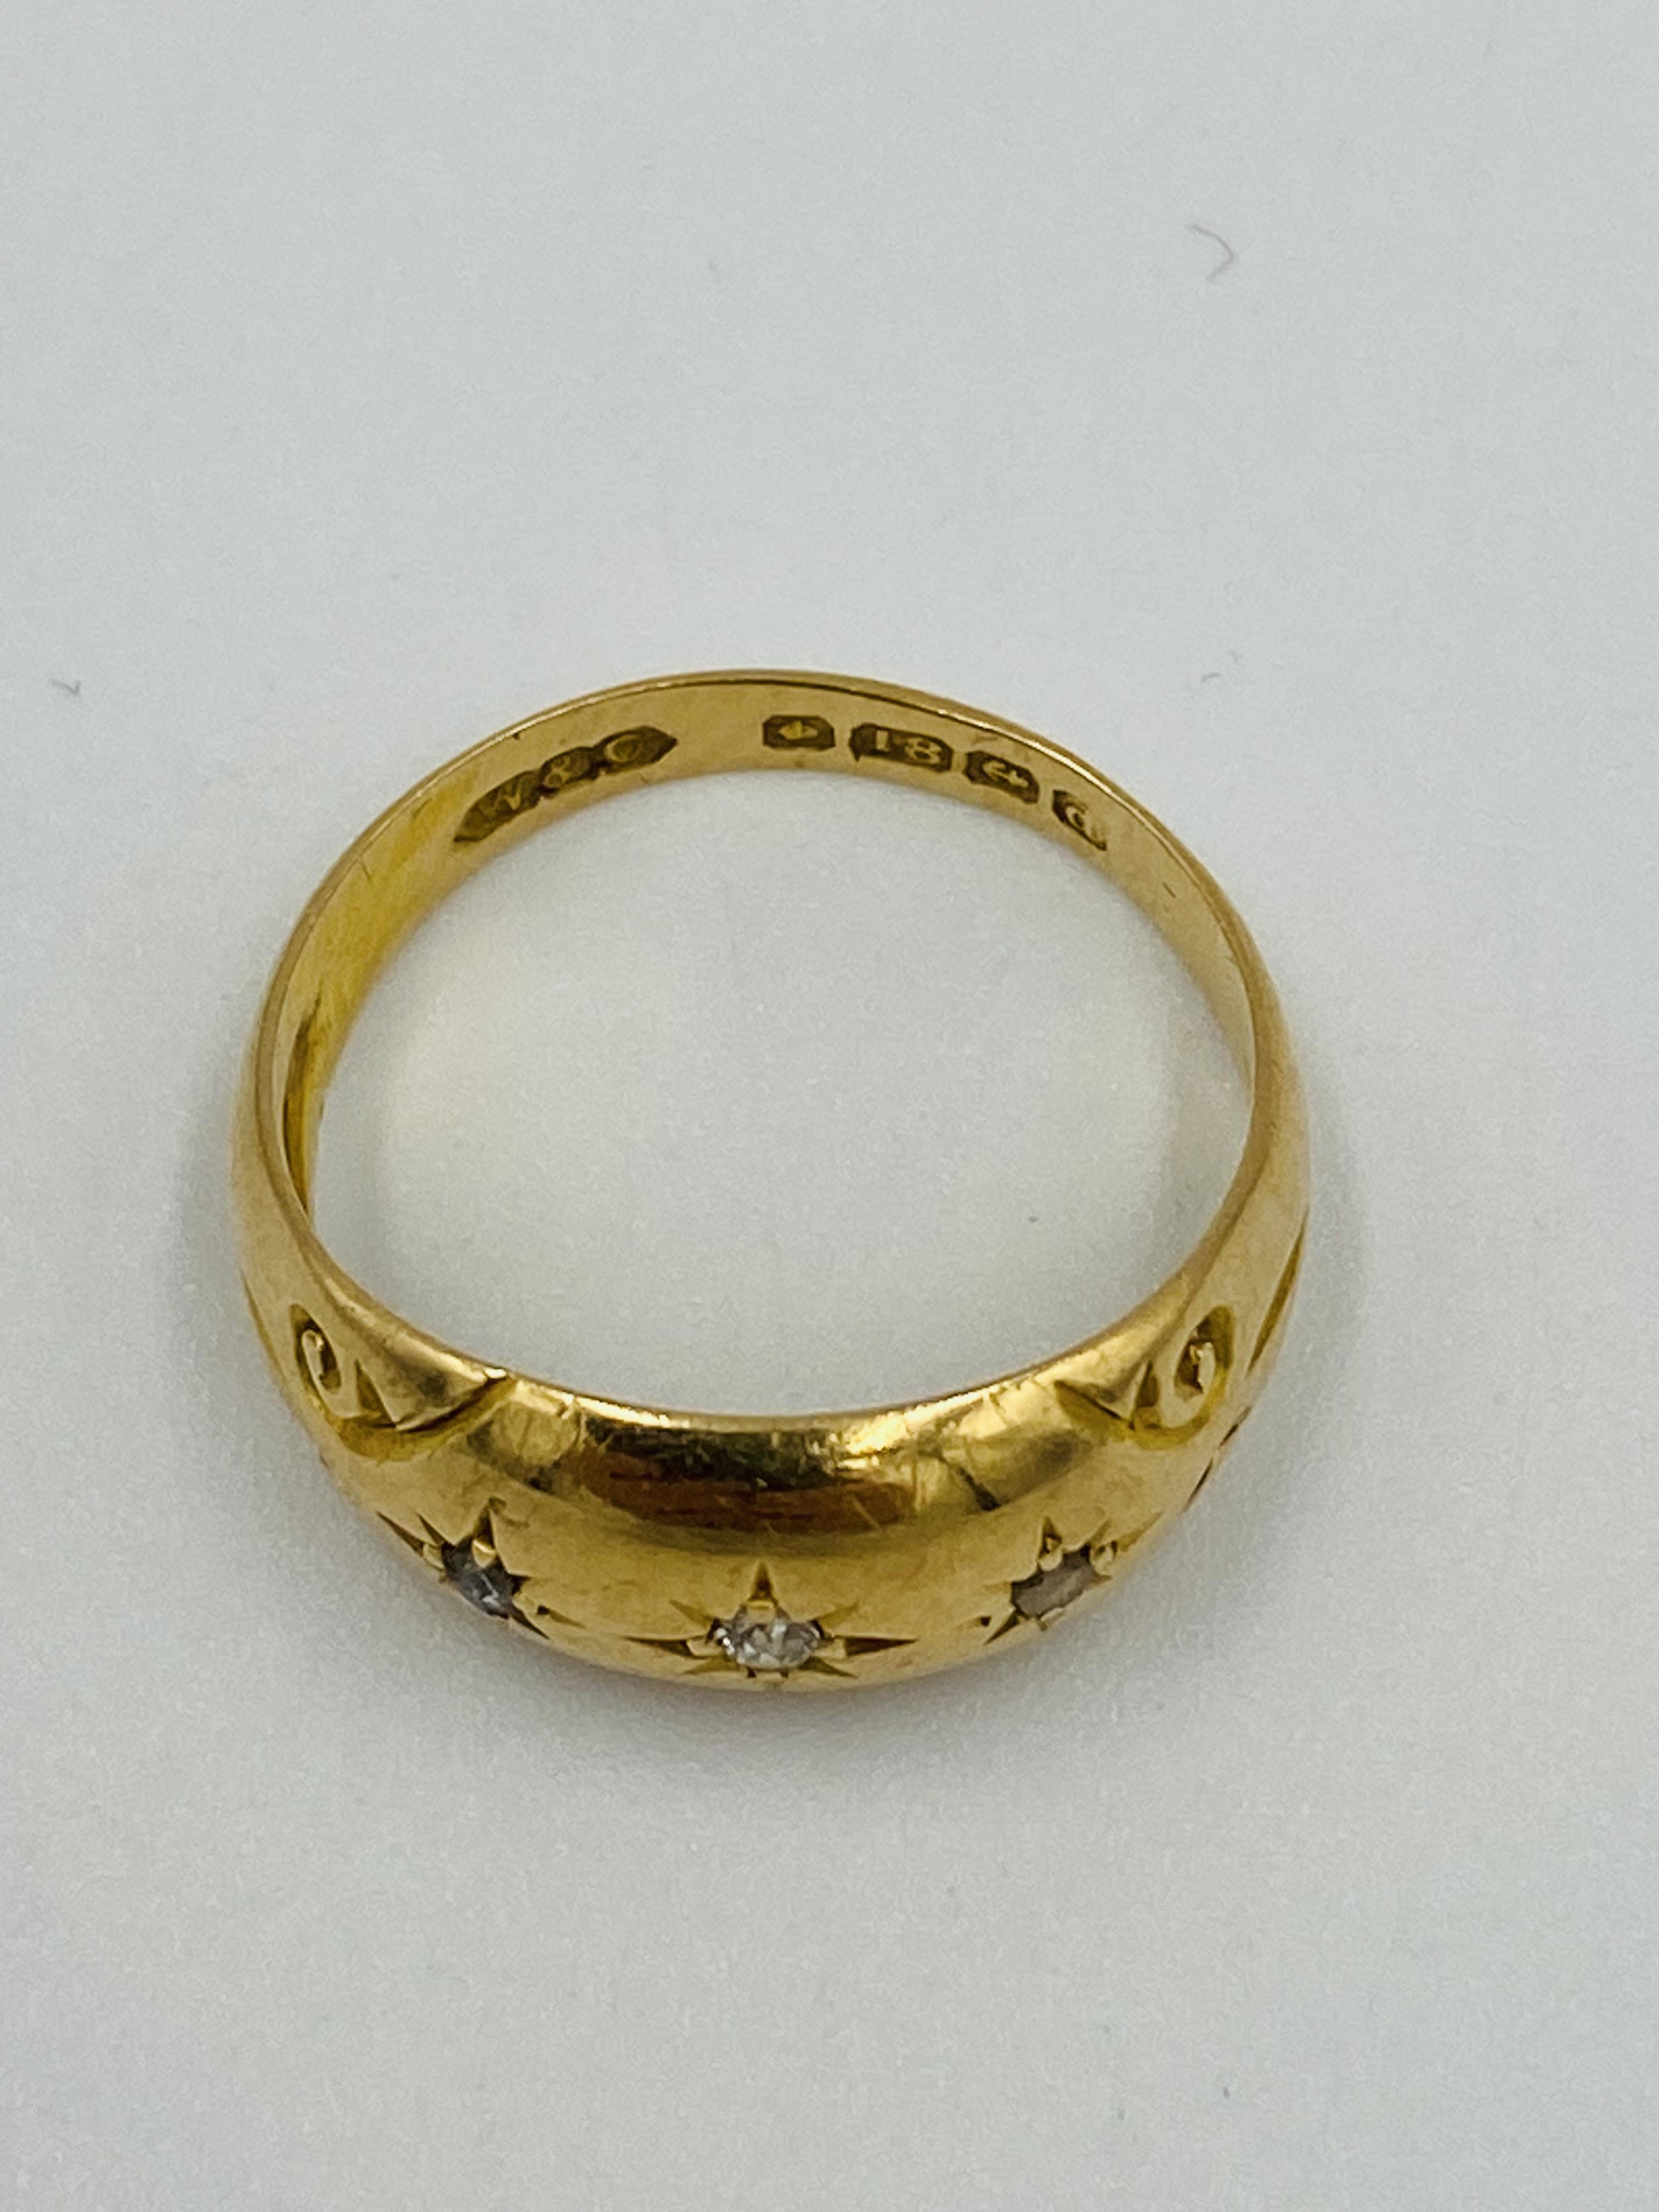 18ct gold ring set with a diamond - Image 2 of 4